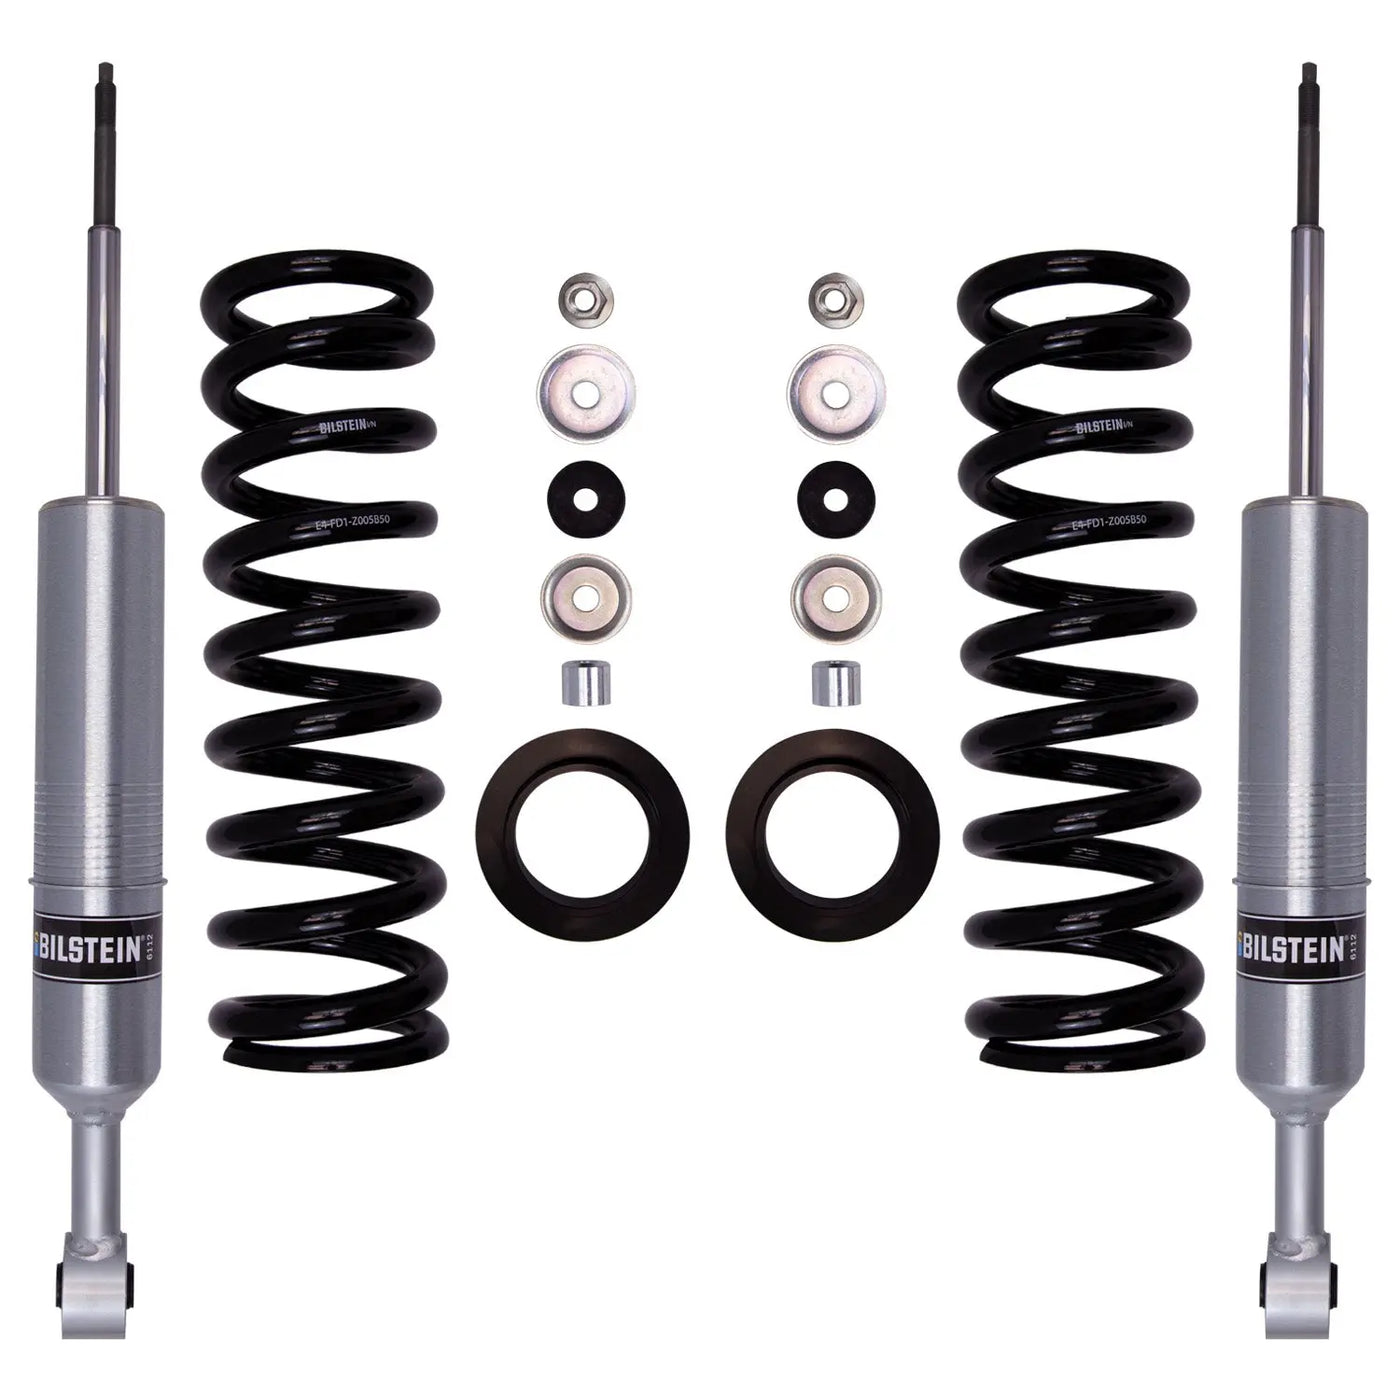 Fully Assembled Bilstein 6112 Front Suspension Kit for Toyota 4Runner 2003-2009, Toyota Tacoma 2005-2023 - Wheel Every Weekend